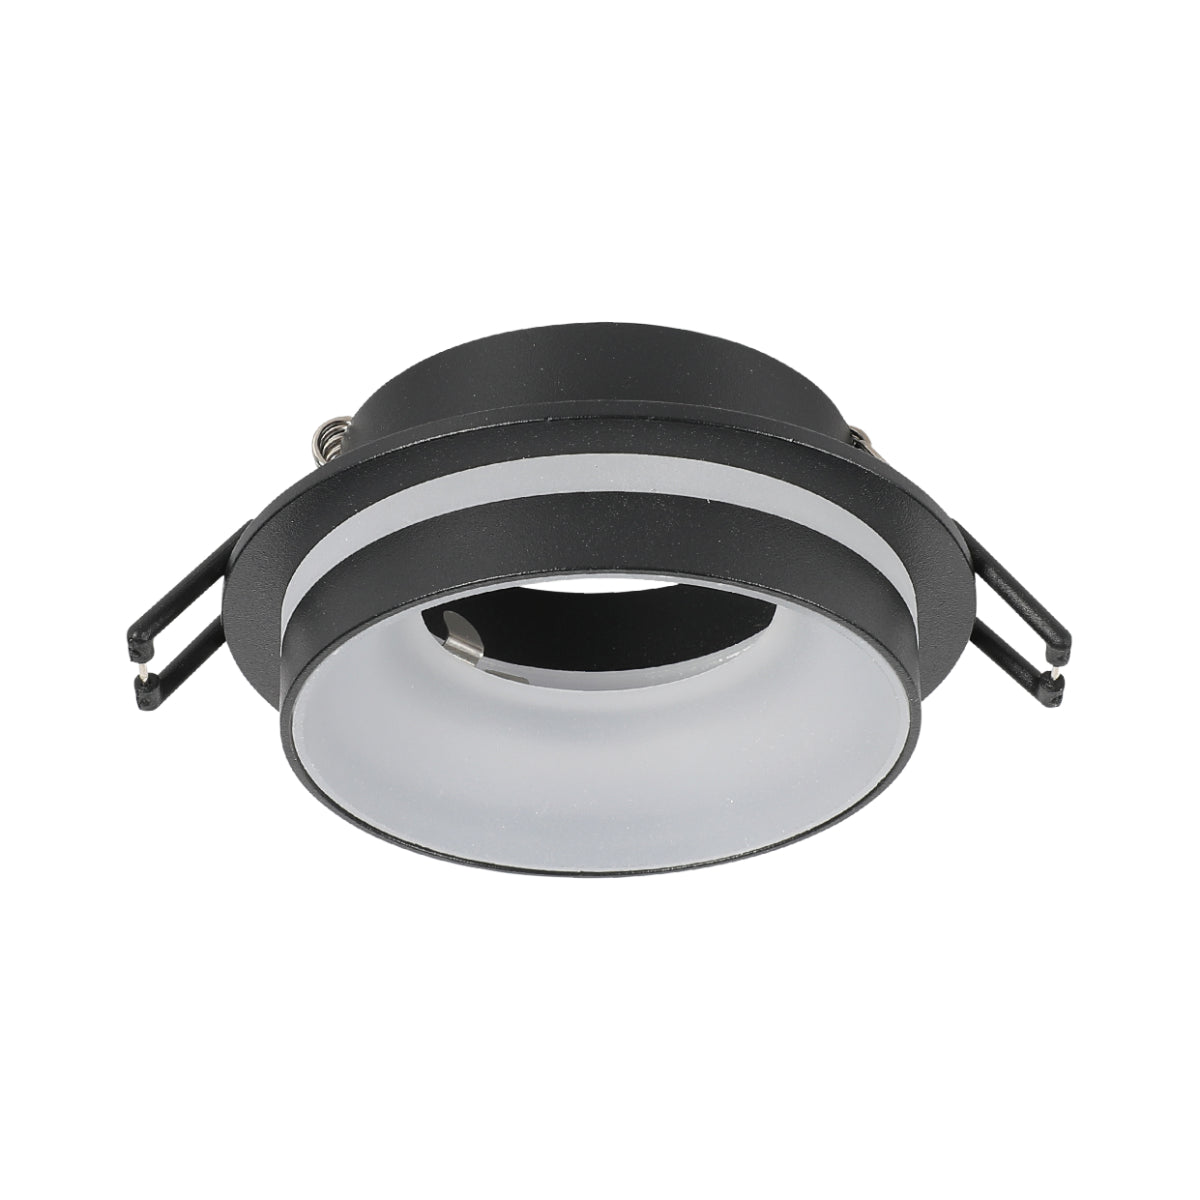 Main image of GU10 Recessed Aluminium Downlight - Dual-Tone Acrylic with Color Matched Trim 143-04044